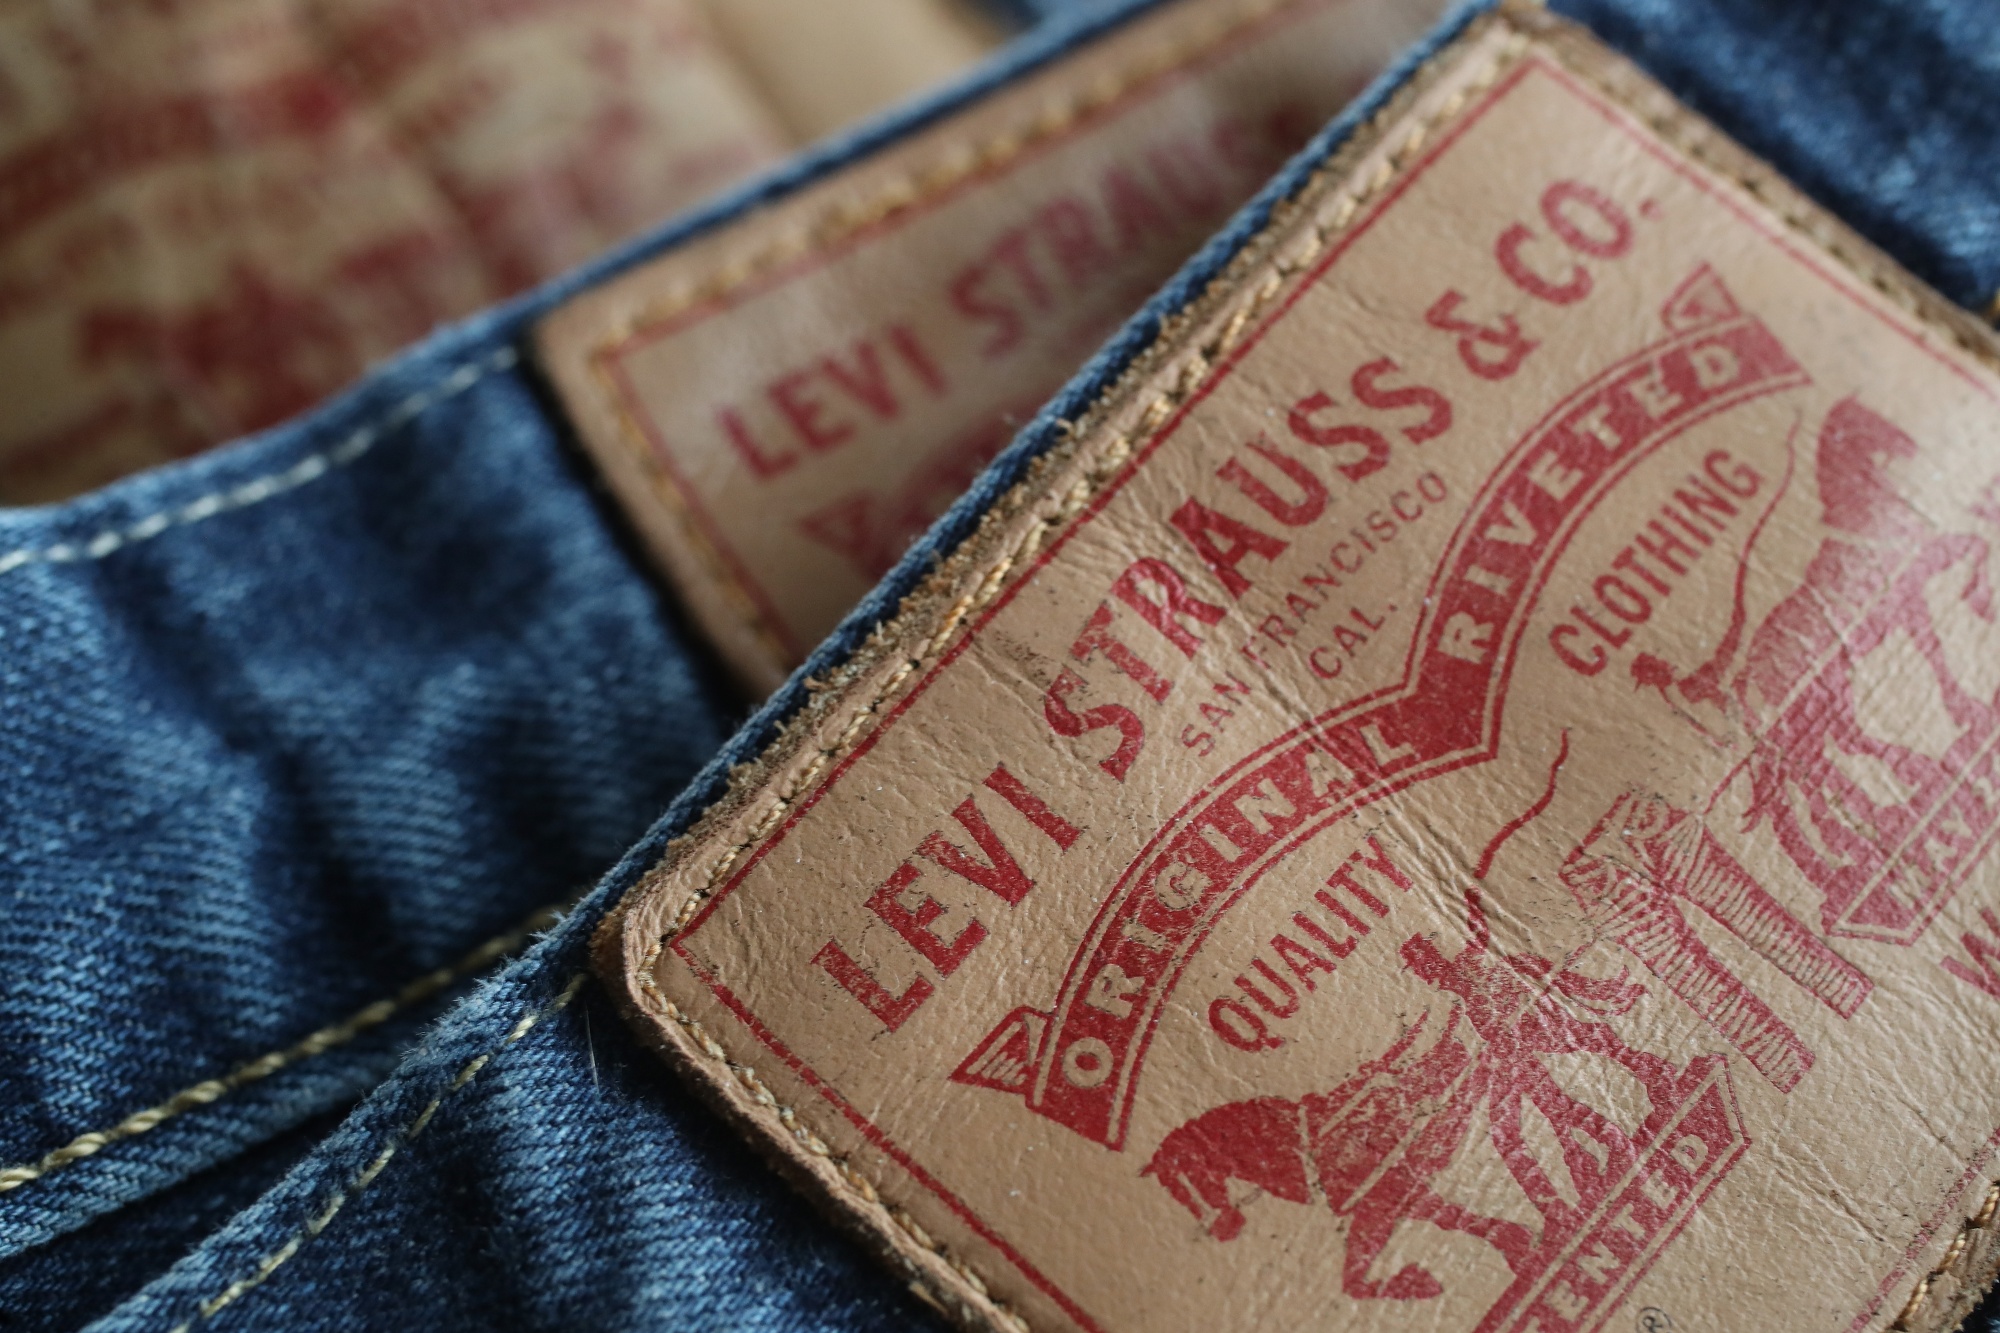 Kohl's CEO steps down to take president role at Levi Strauss